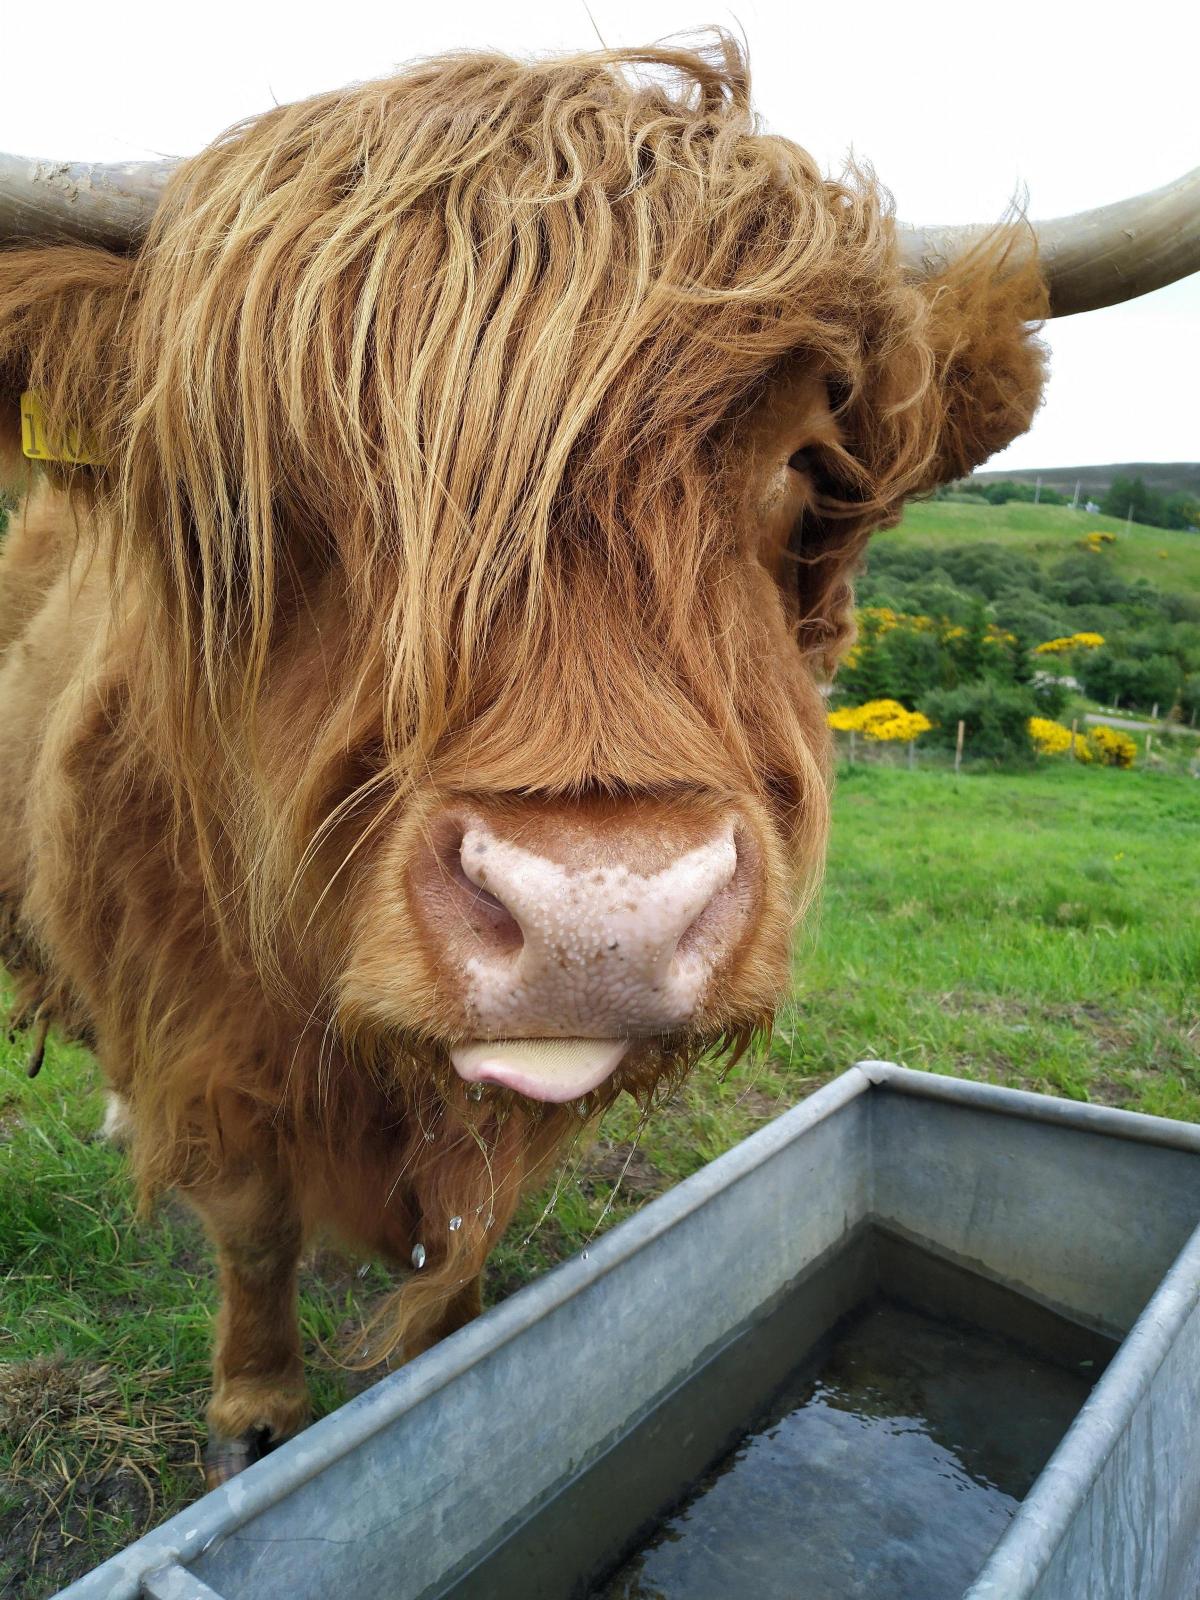 Jess - 'Catching every last drop' Highland Cows At Hill End Croft.